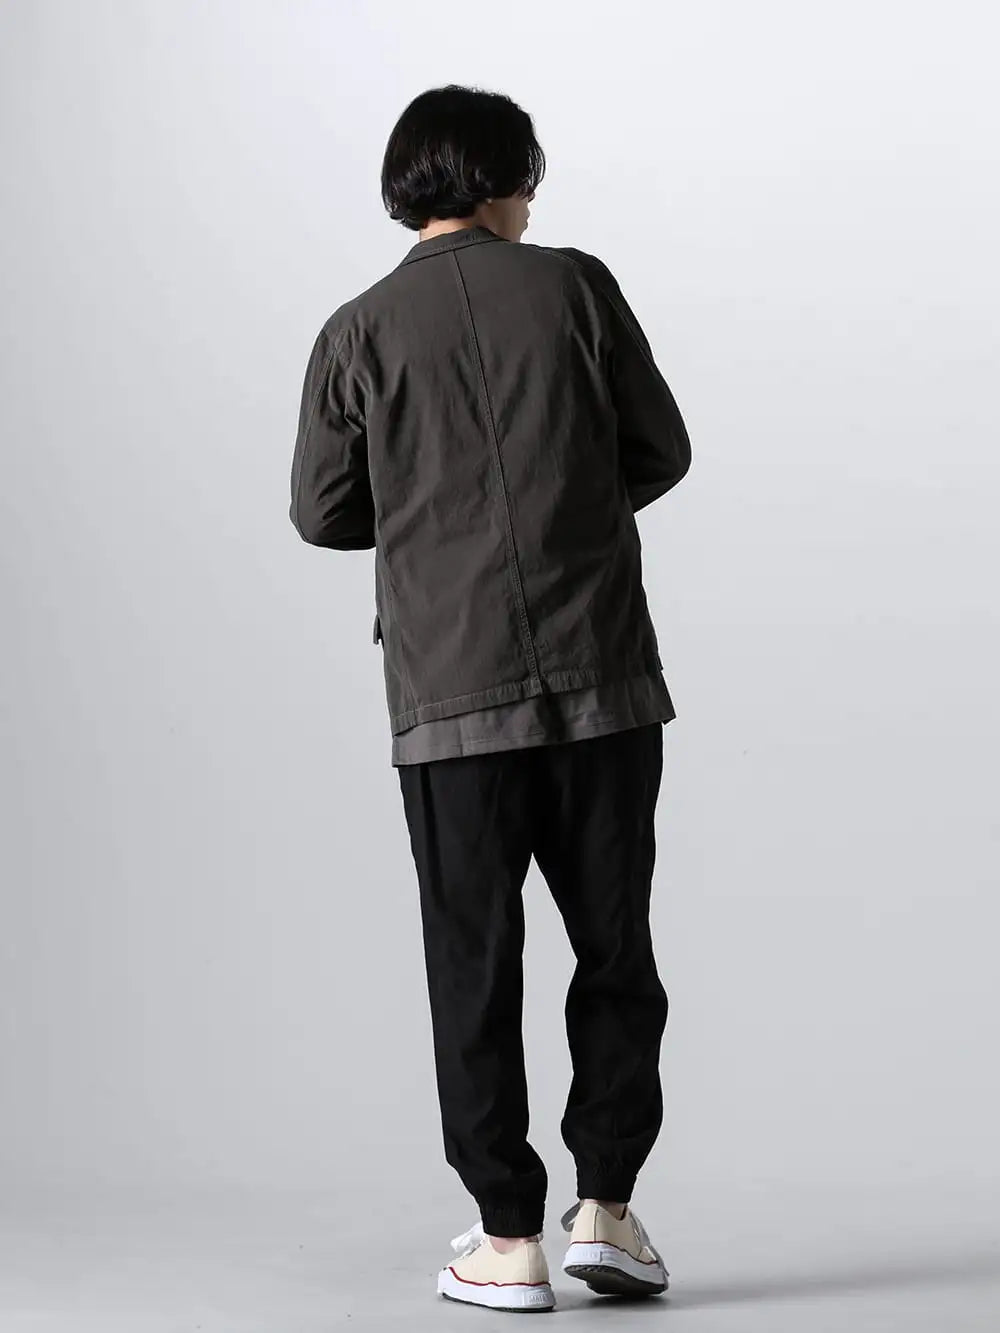 The Viridi-anne 24SS styling - The necessity of selecting shoes - VI-3710-06-OliveDrab - Dry Cotton Jacket Olive Drab - VI-3744-01-Gray - Cotton Jersey Pocket T-shirt Gray - VI-3716-04 - Cotton Elastic Cuffed Pants - A04FW729 - PETERSON Original sole canvas Lowcut sneaker Natural 1-003